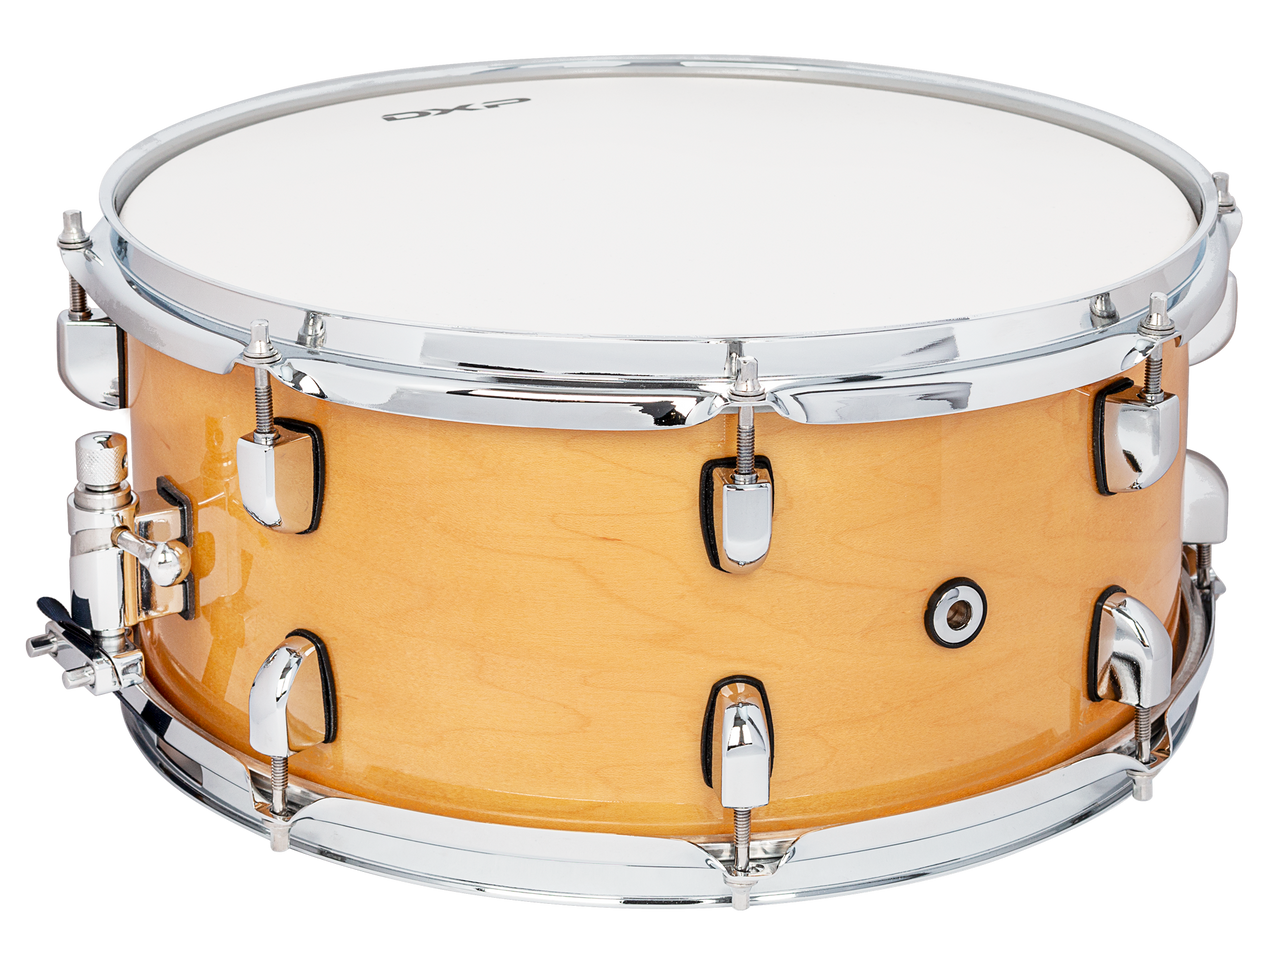 14" x 6_". 6 ply. Maple shell with 16 chrome lugs with black gaskets. Super smooth strainer. Remo Coated UT Drum head. Natural finish.